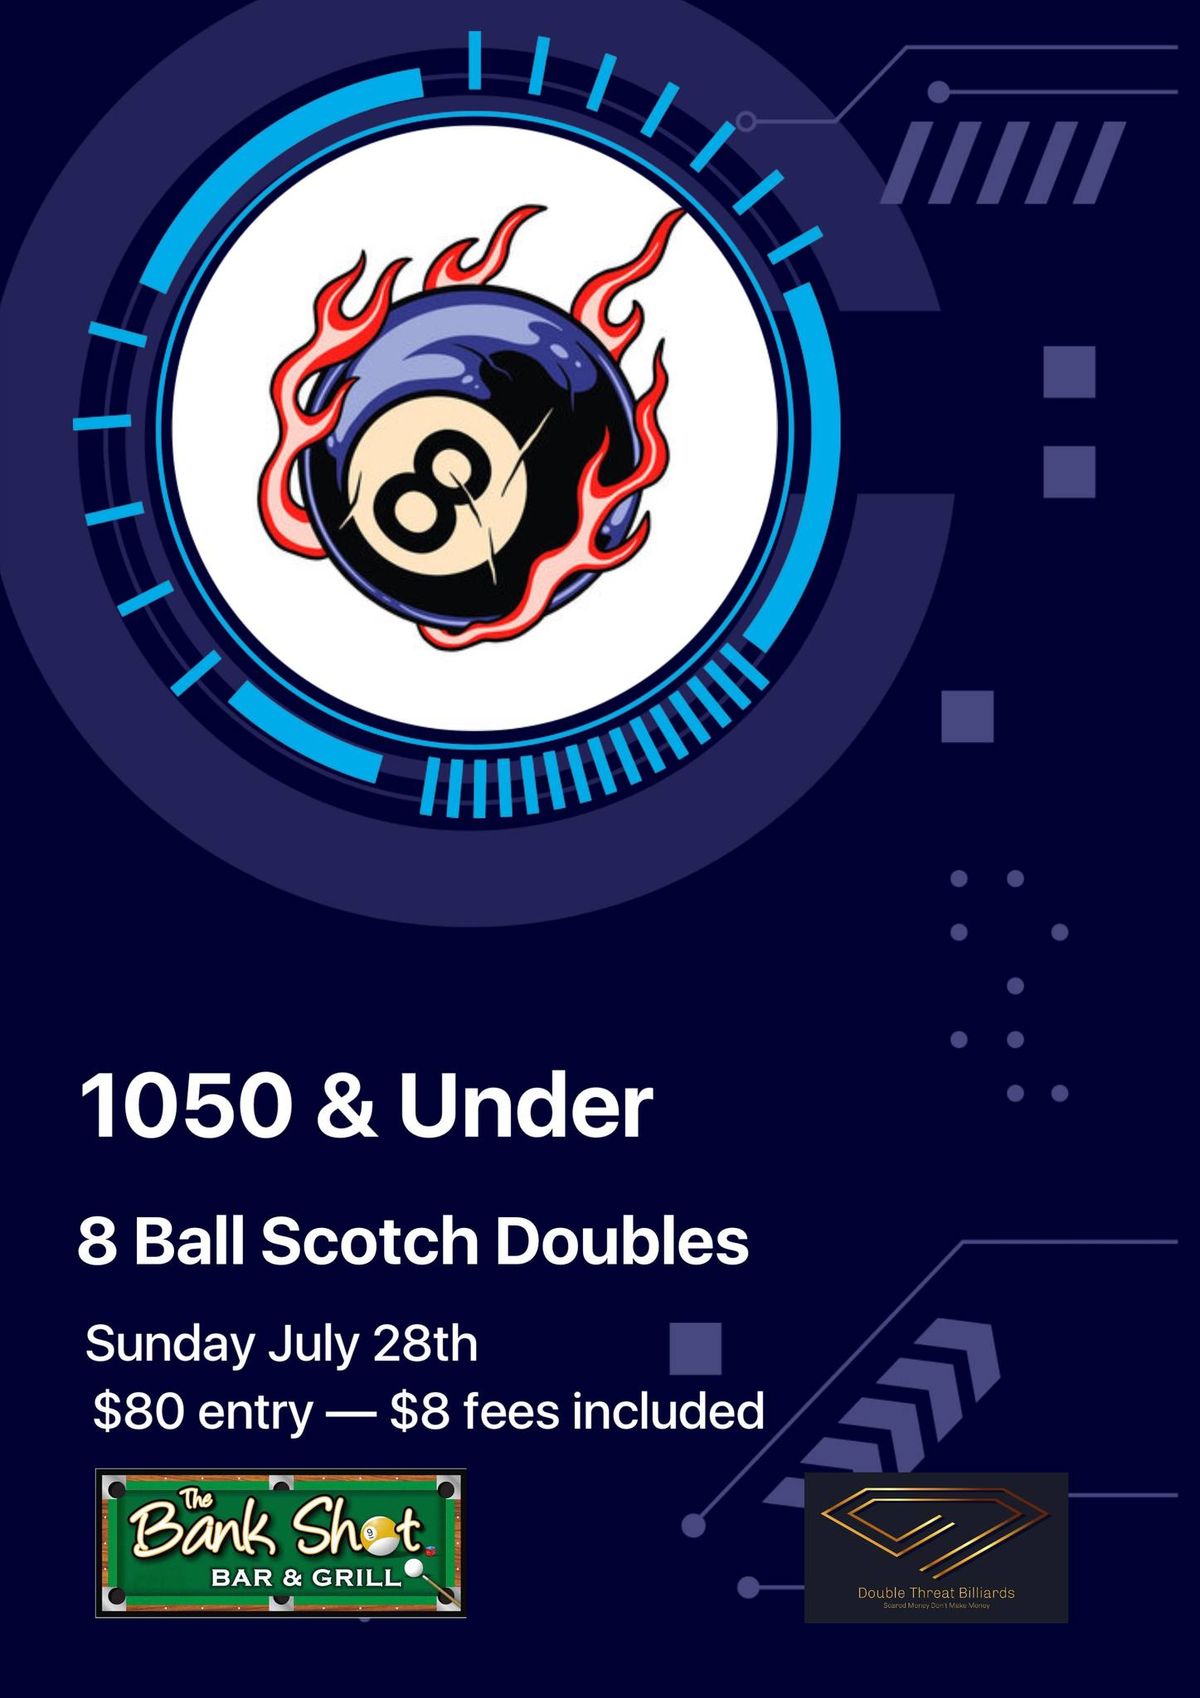 1050 & Under: ALL 8 Ball Scotch Doubles